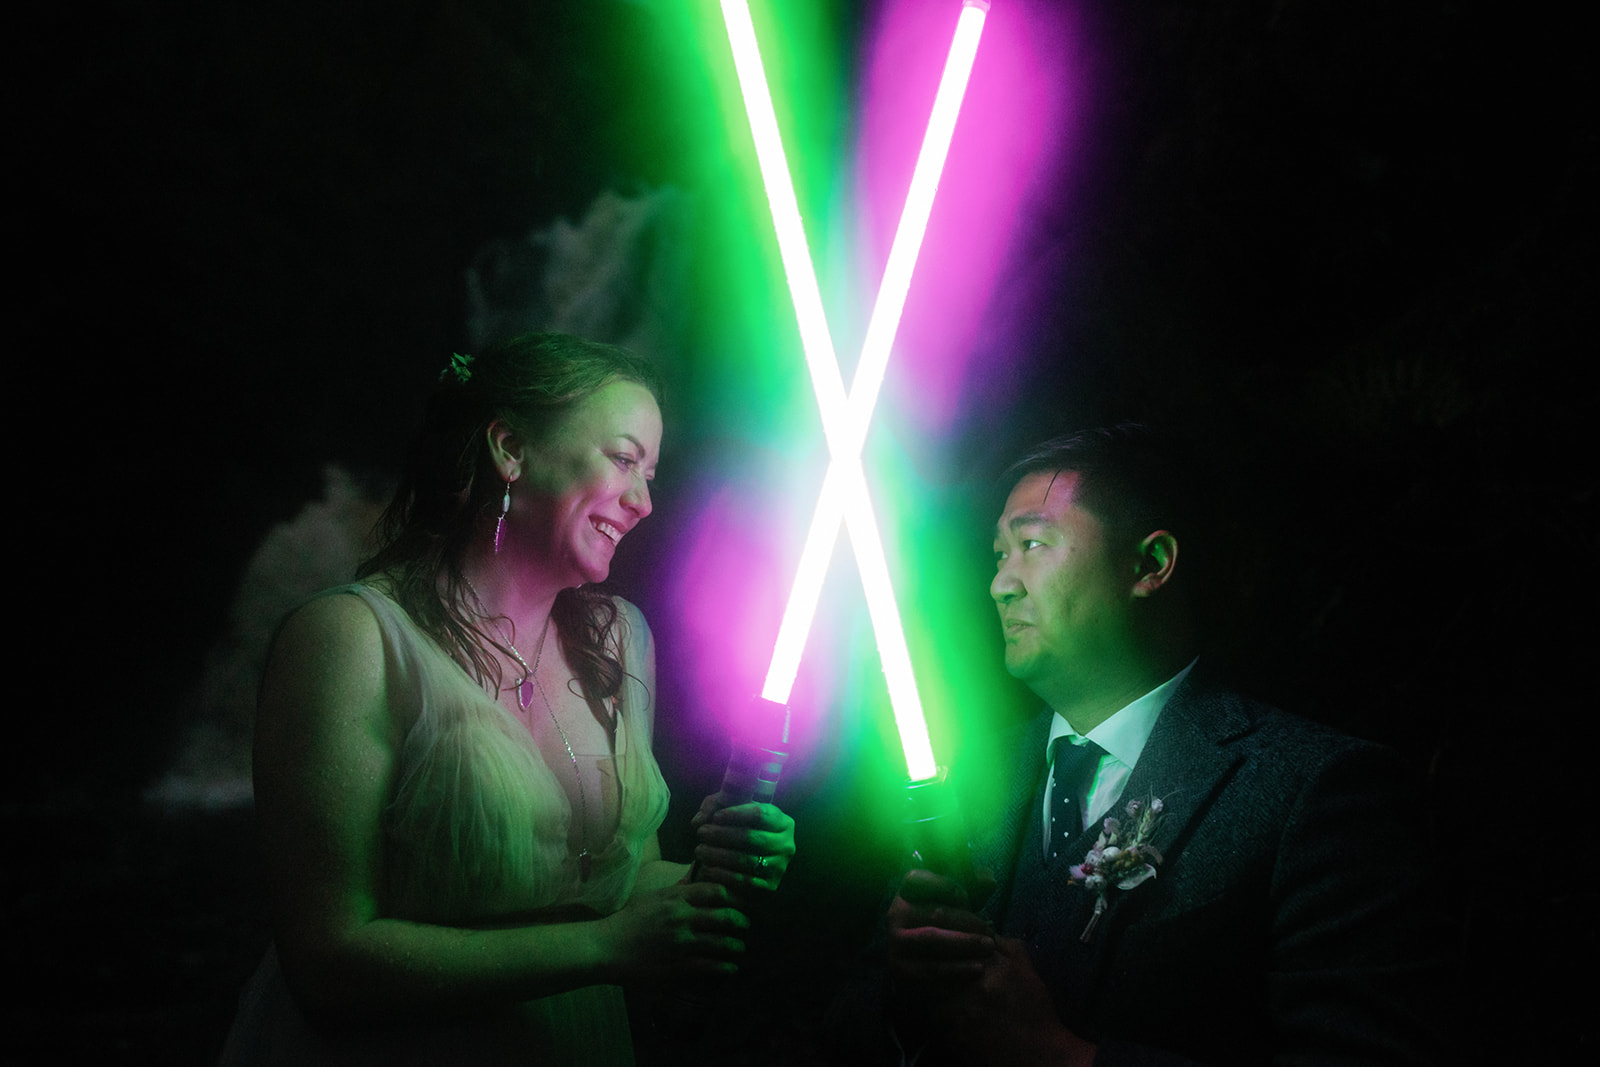 Mellie and Andrew enjoyed their evening photoshoot while holding Star Wars light sabers as props.